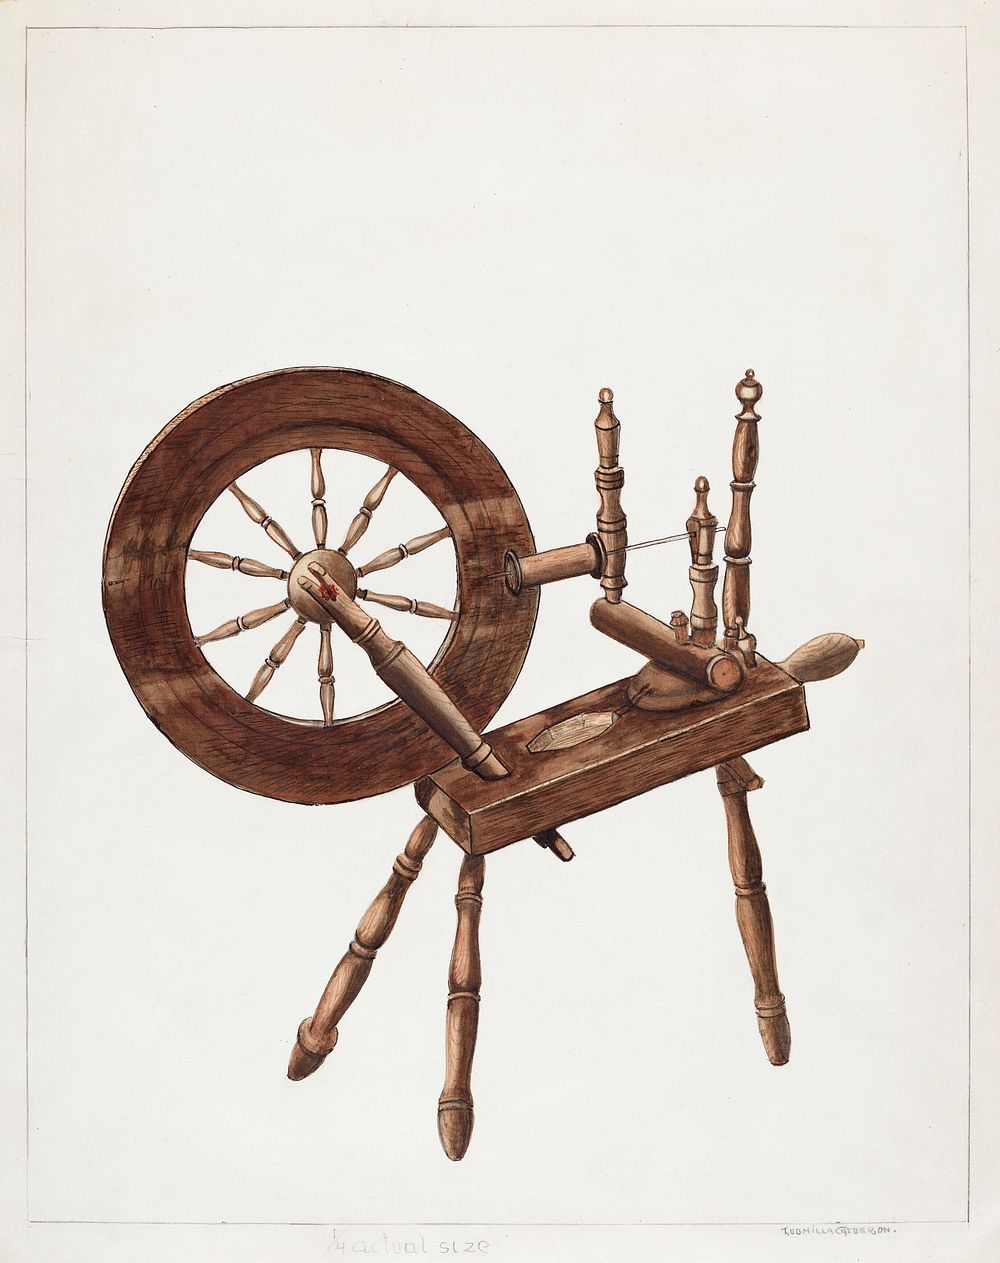 Spinning Wheel (1935&ndash;1942) by Ludmilla Calderon. Original from The National Gallery of Art. Digitally enhanced by…